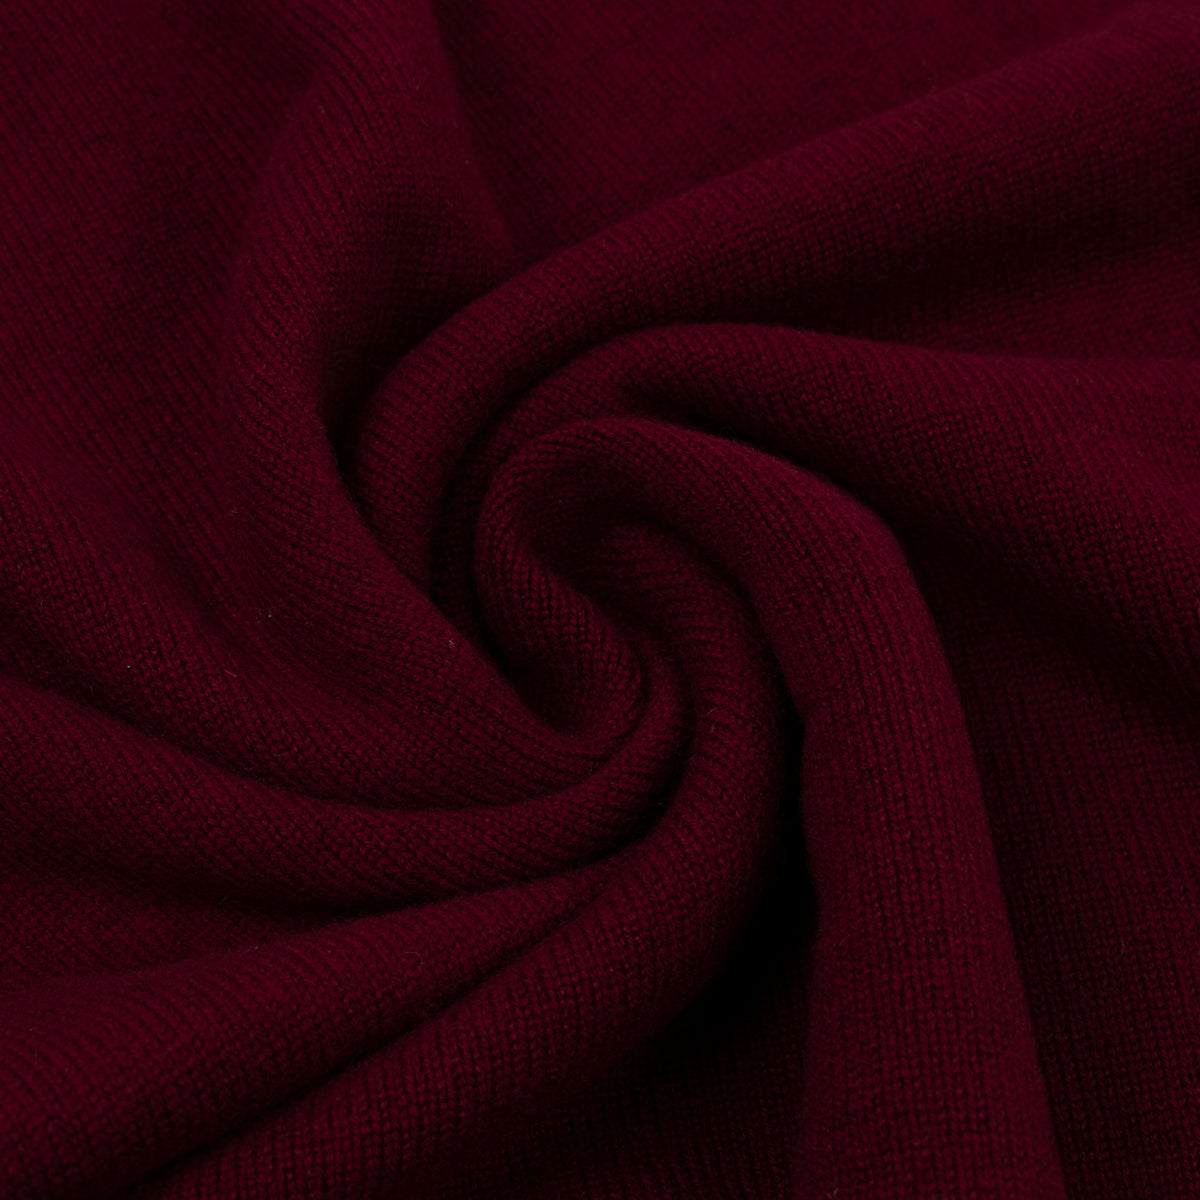 Claret Red Tobermorey 4ply V-Neck Cashmere Sweater  Robert Old   